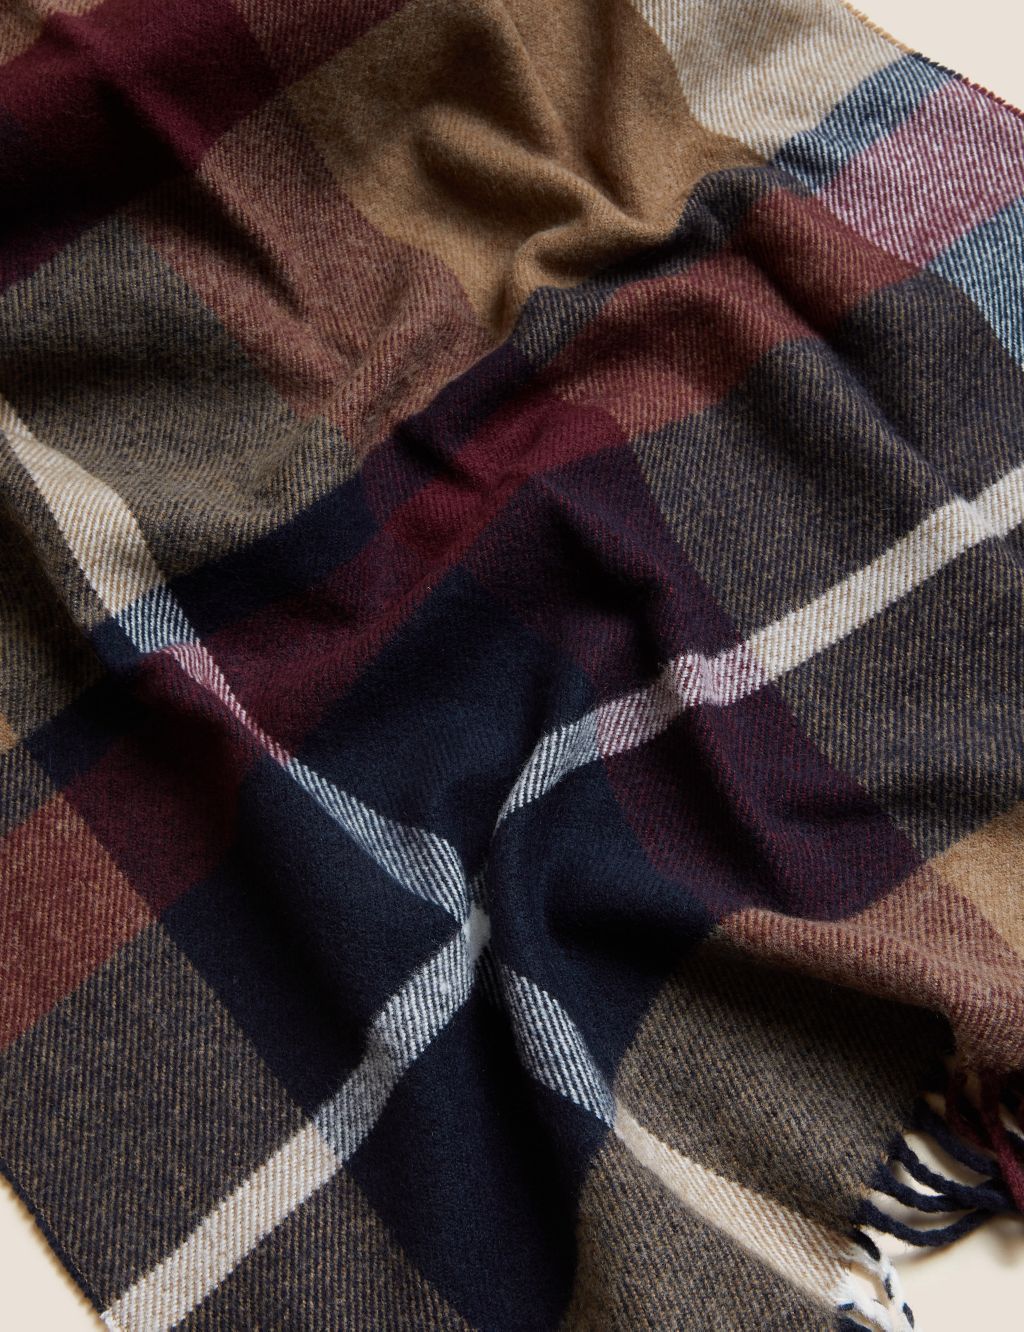 Checked Scarf image 1